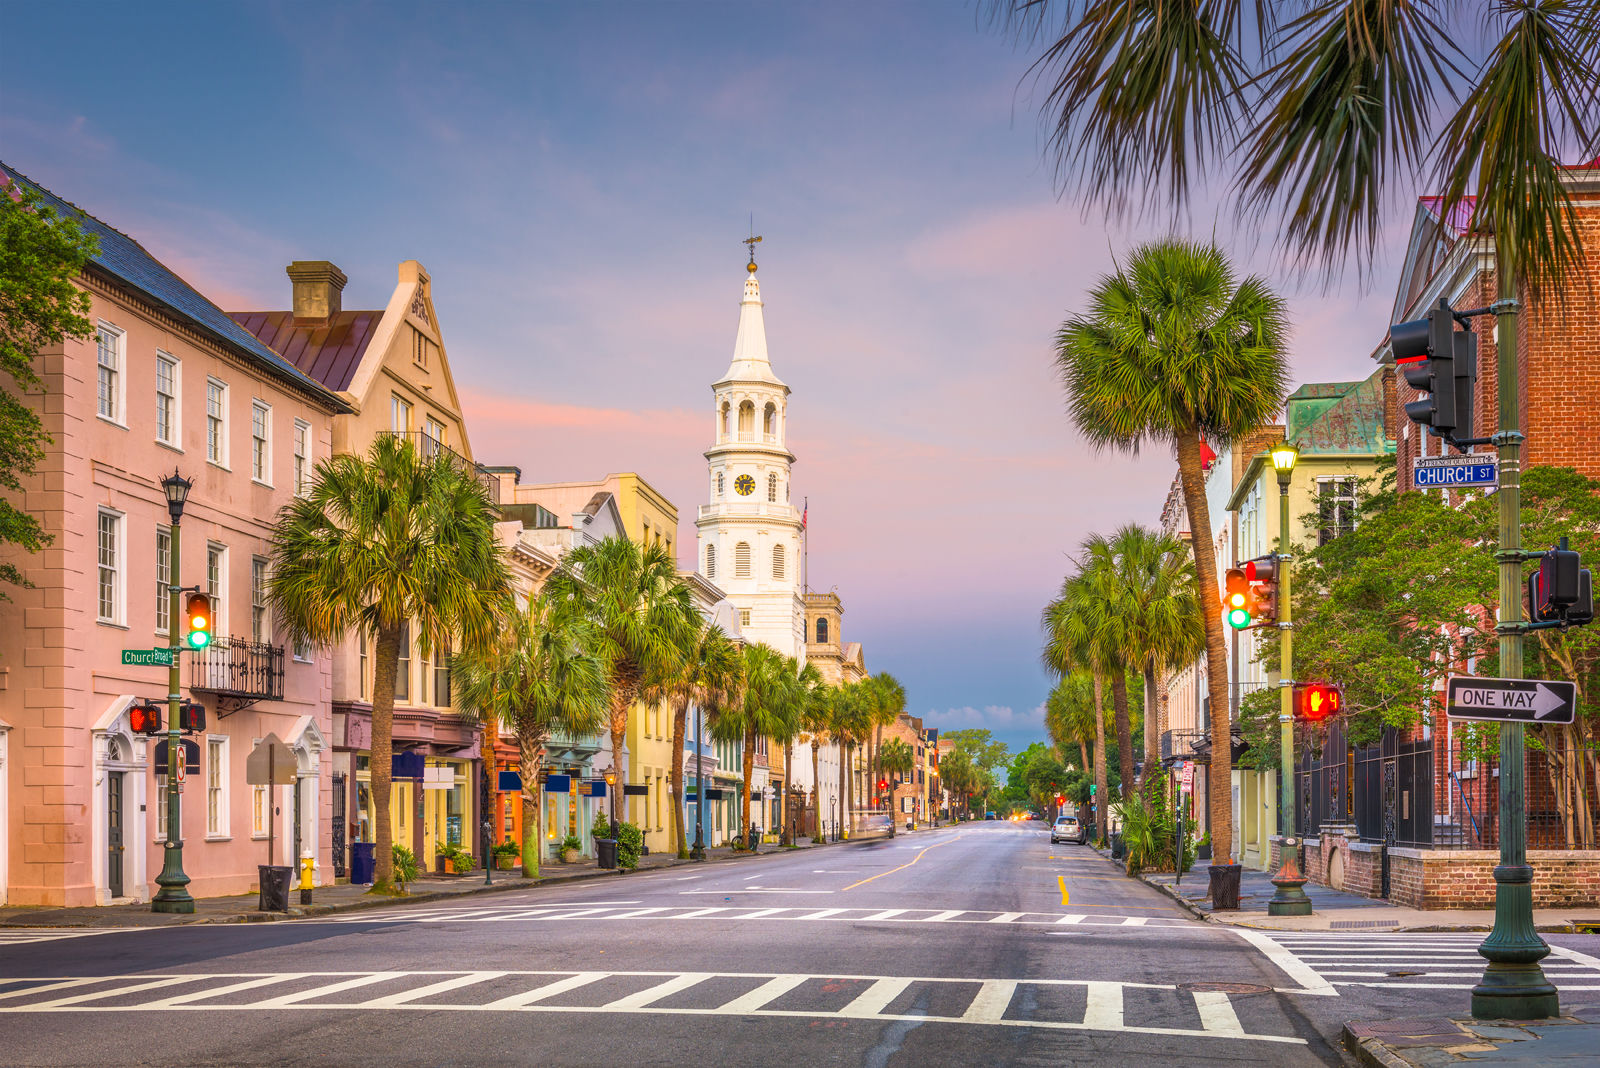 Charleston, South Carolina, comes in at No. 8 on the list. The city dates back to 1670 and was where the first shots were fired in the American Civil War. It also plays a major role in African American history with some historians estimating that nearly half of all Africans brought to the U.S. arrived in Charleston. (Getty Images/Thinkstock)